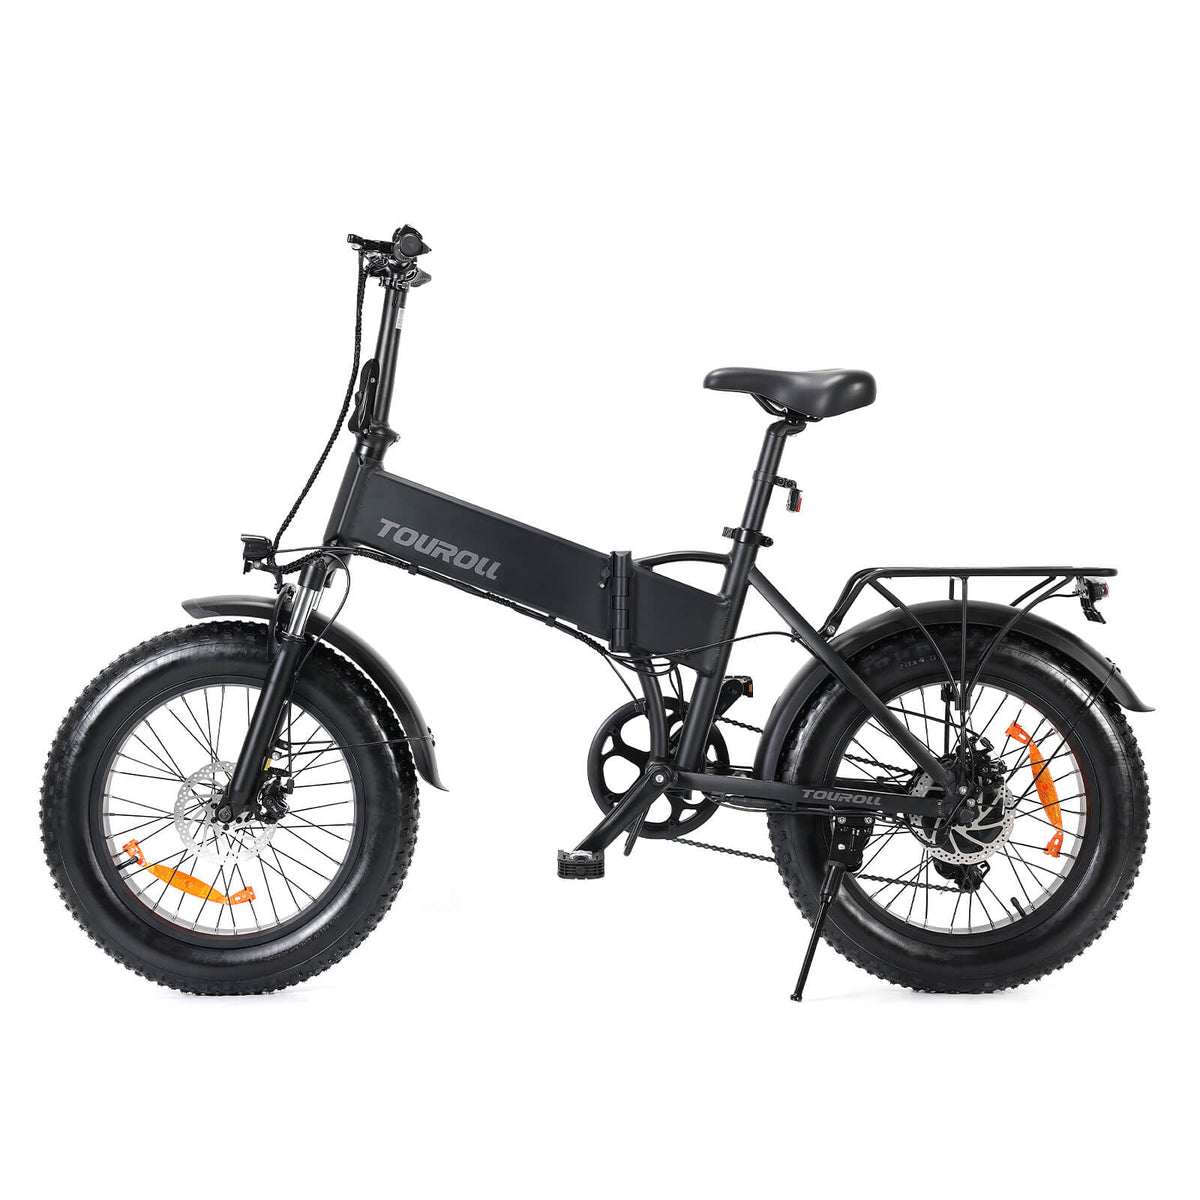 TOUROLL S1 Fat Tyre Electric Bike-Electric Scooters London